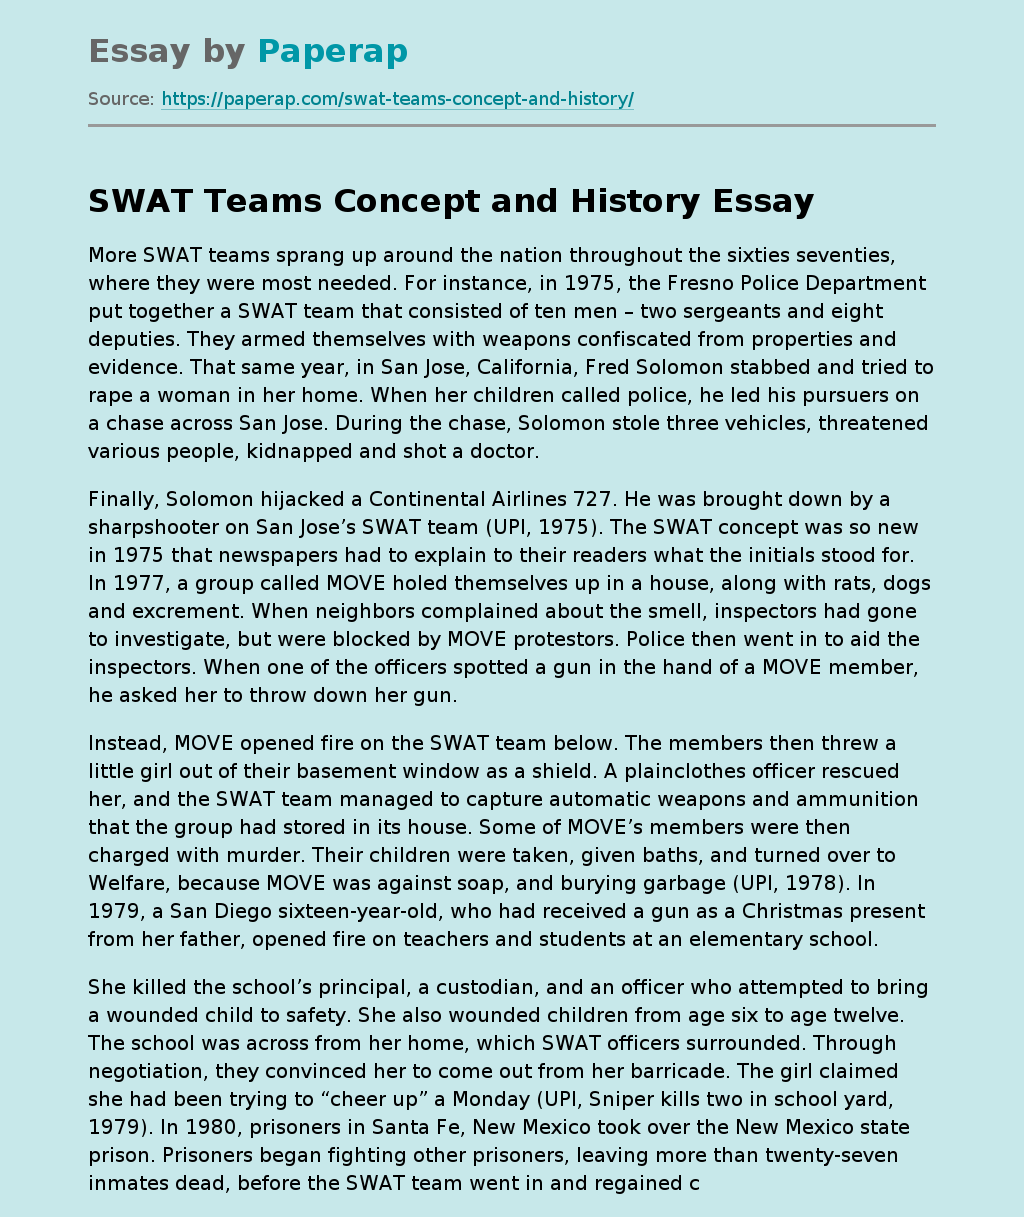 SWAT Teams Concept and History